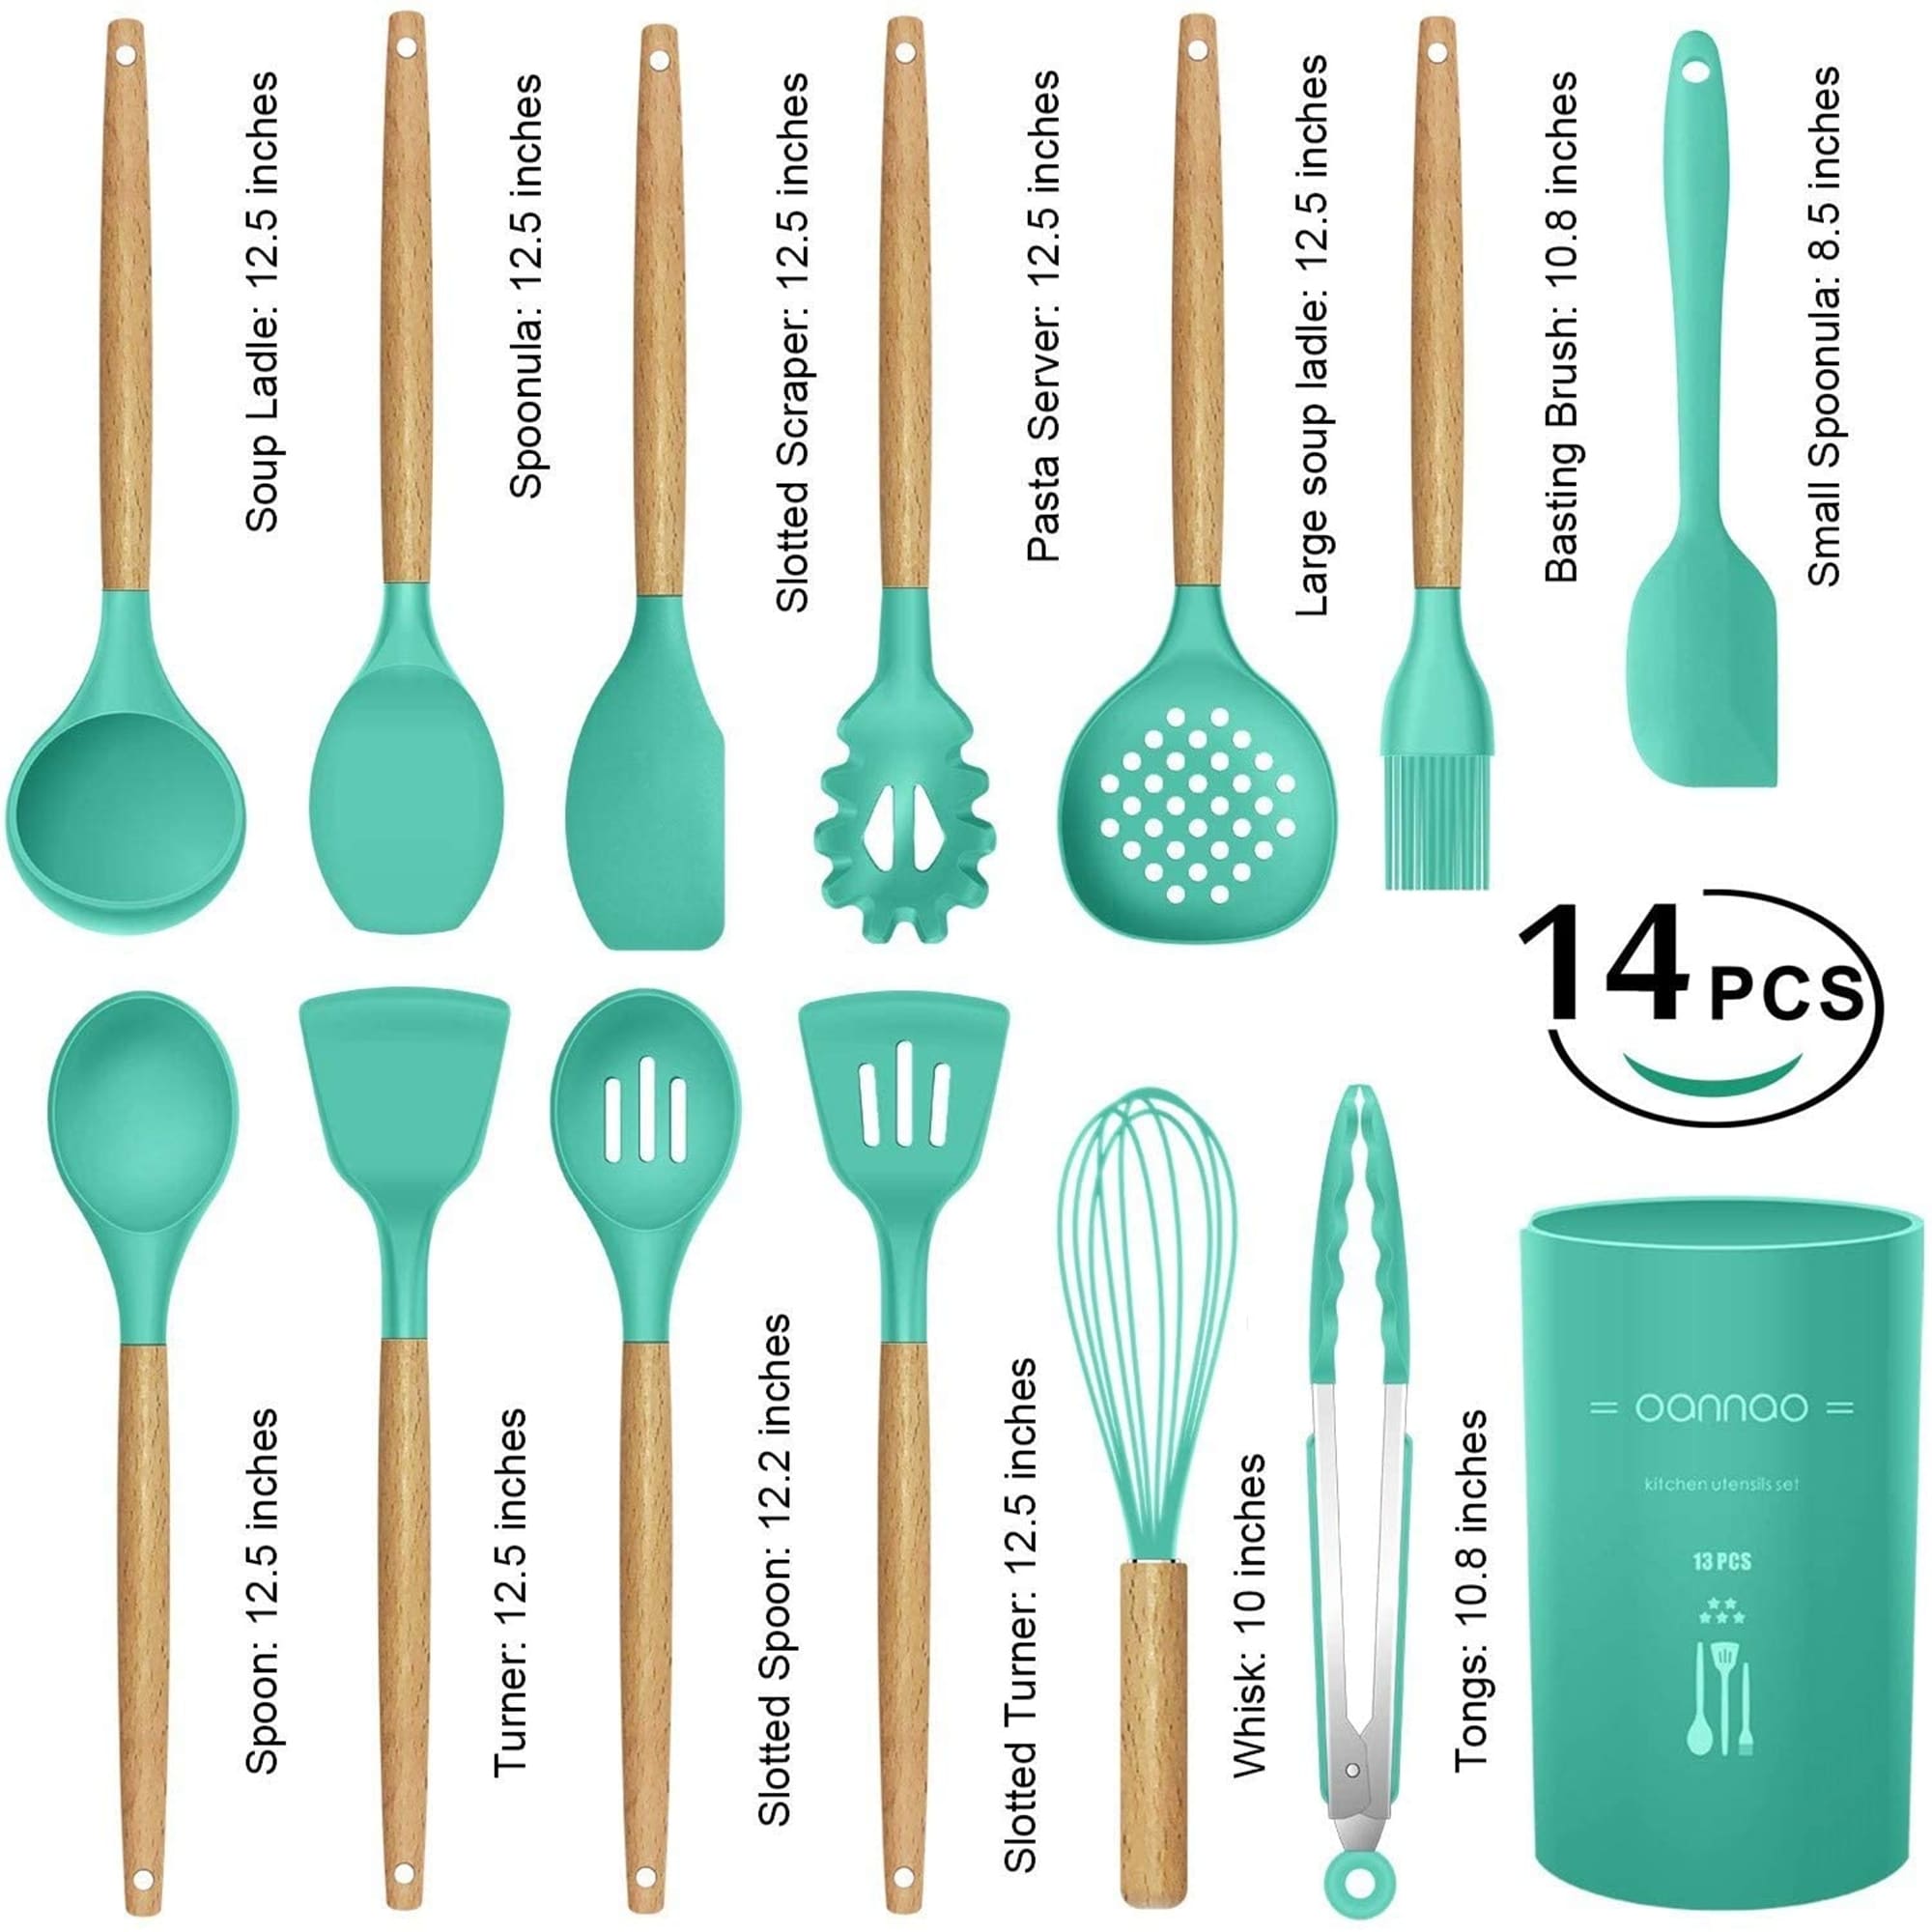 https://ak1.ostkcdn.com/images/products/is/images/direct/2264cbe9212bc9ed643d6ddbf514a07eb6f5e820/14-Pcs-Silicone-Cooking-Utensils-Kitchen-Utensil-Set%2C446%C2%B0F-Heat.jpg